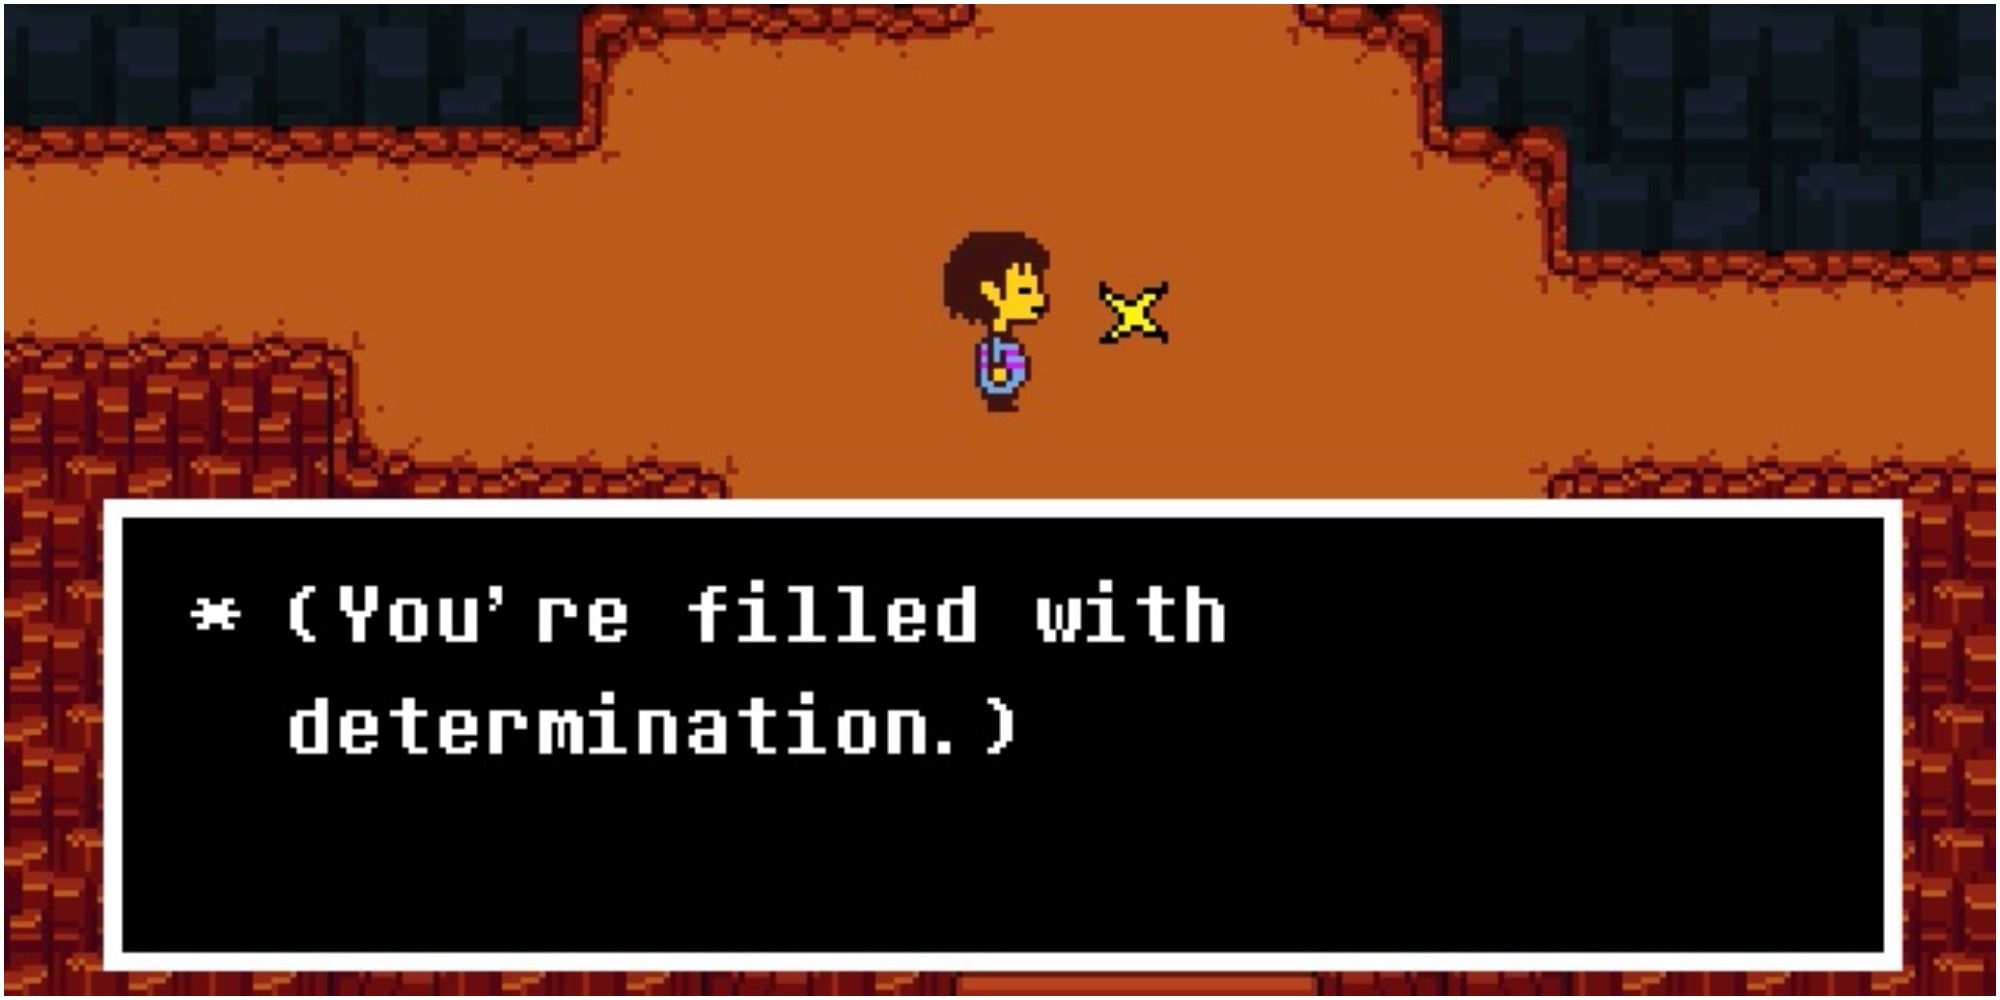 Frisk stands at a save point in Undertale. The text reads "You're filled with determination."